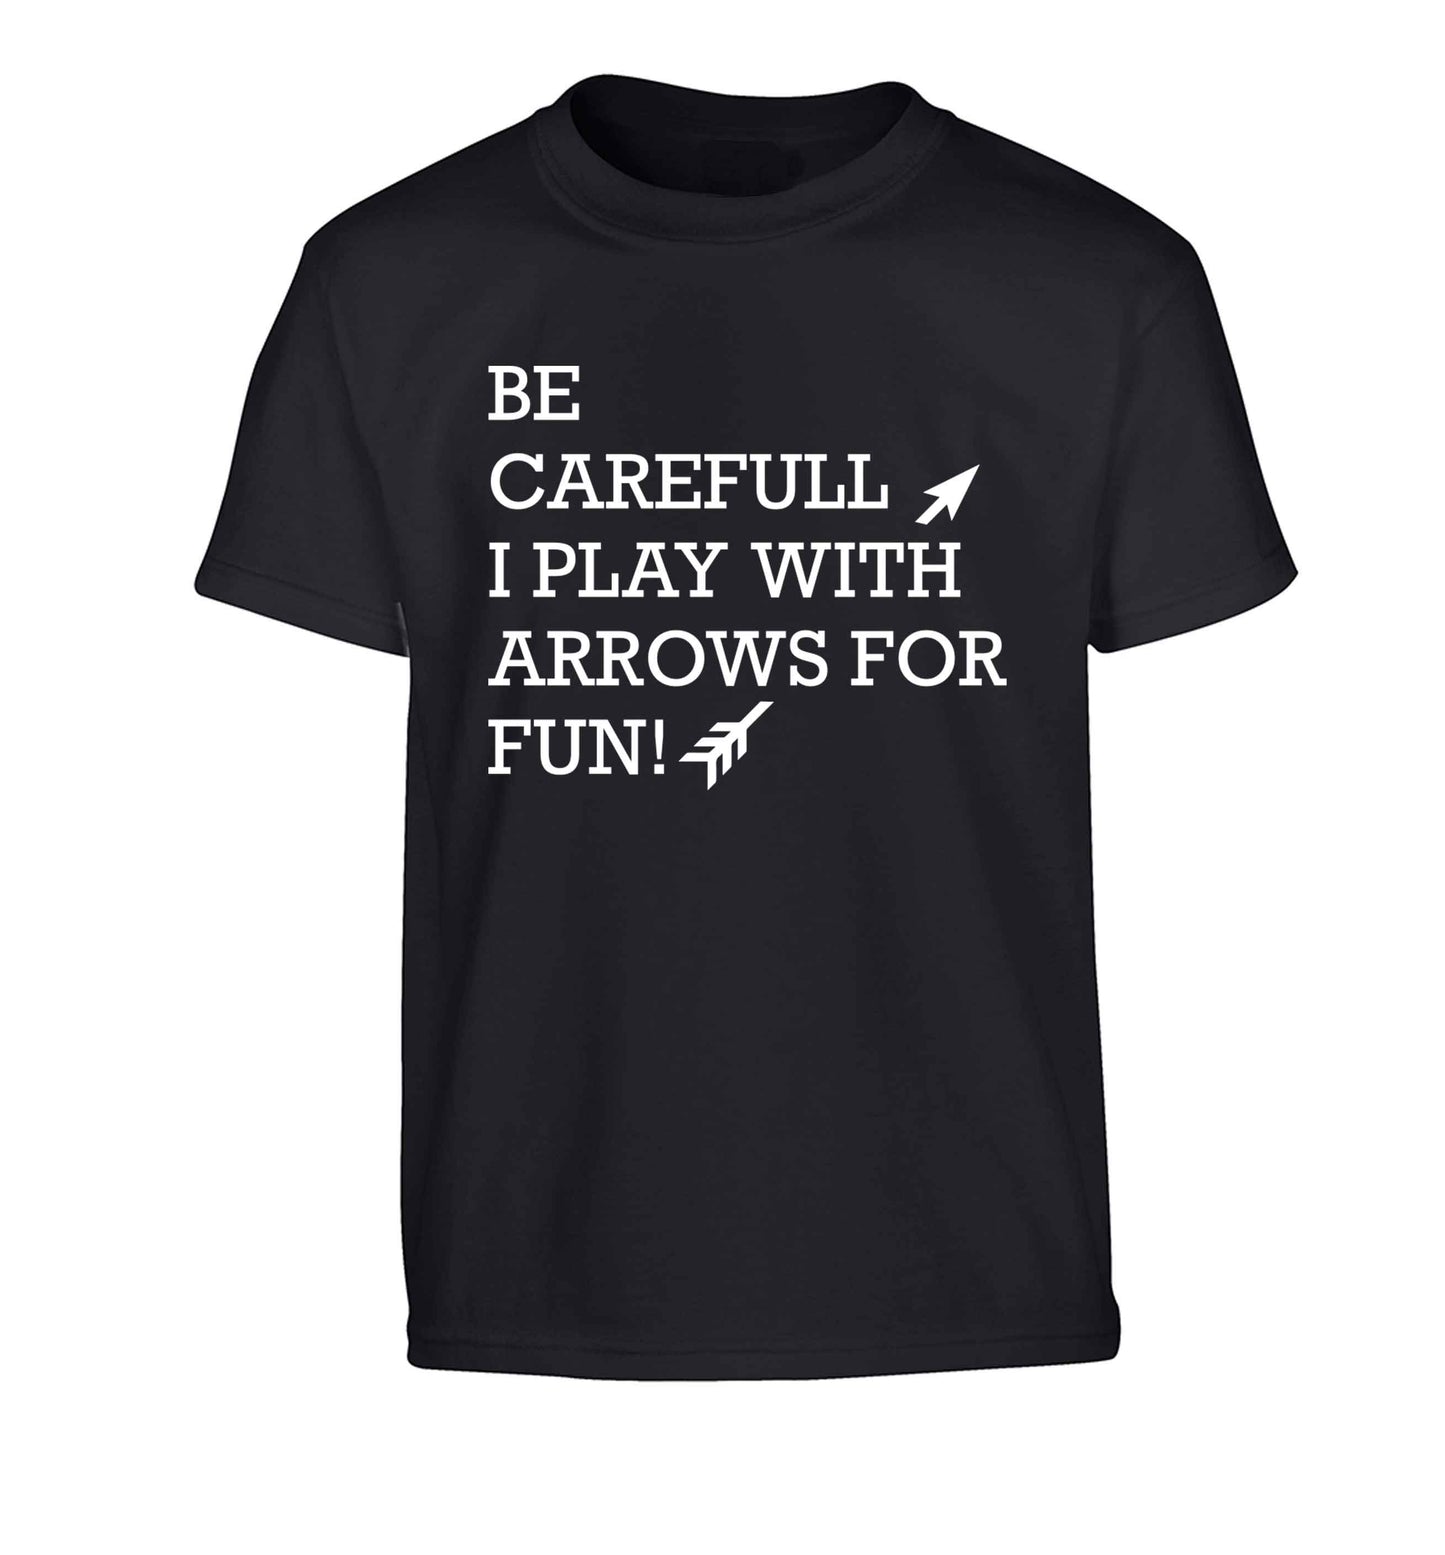 Be carefull I play with arrows for fun Children's black Tshirt 12-13 Years